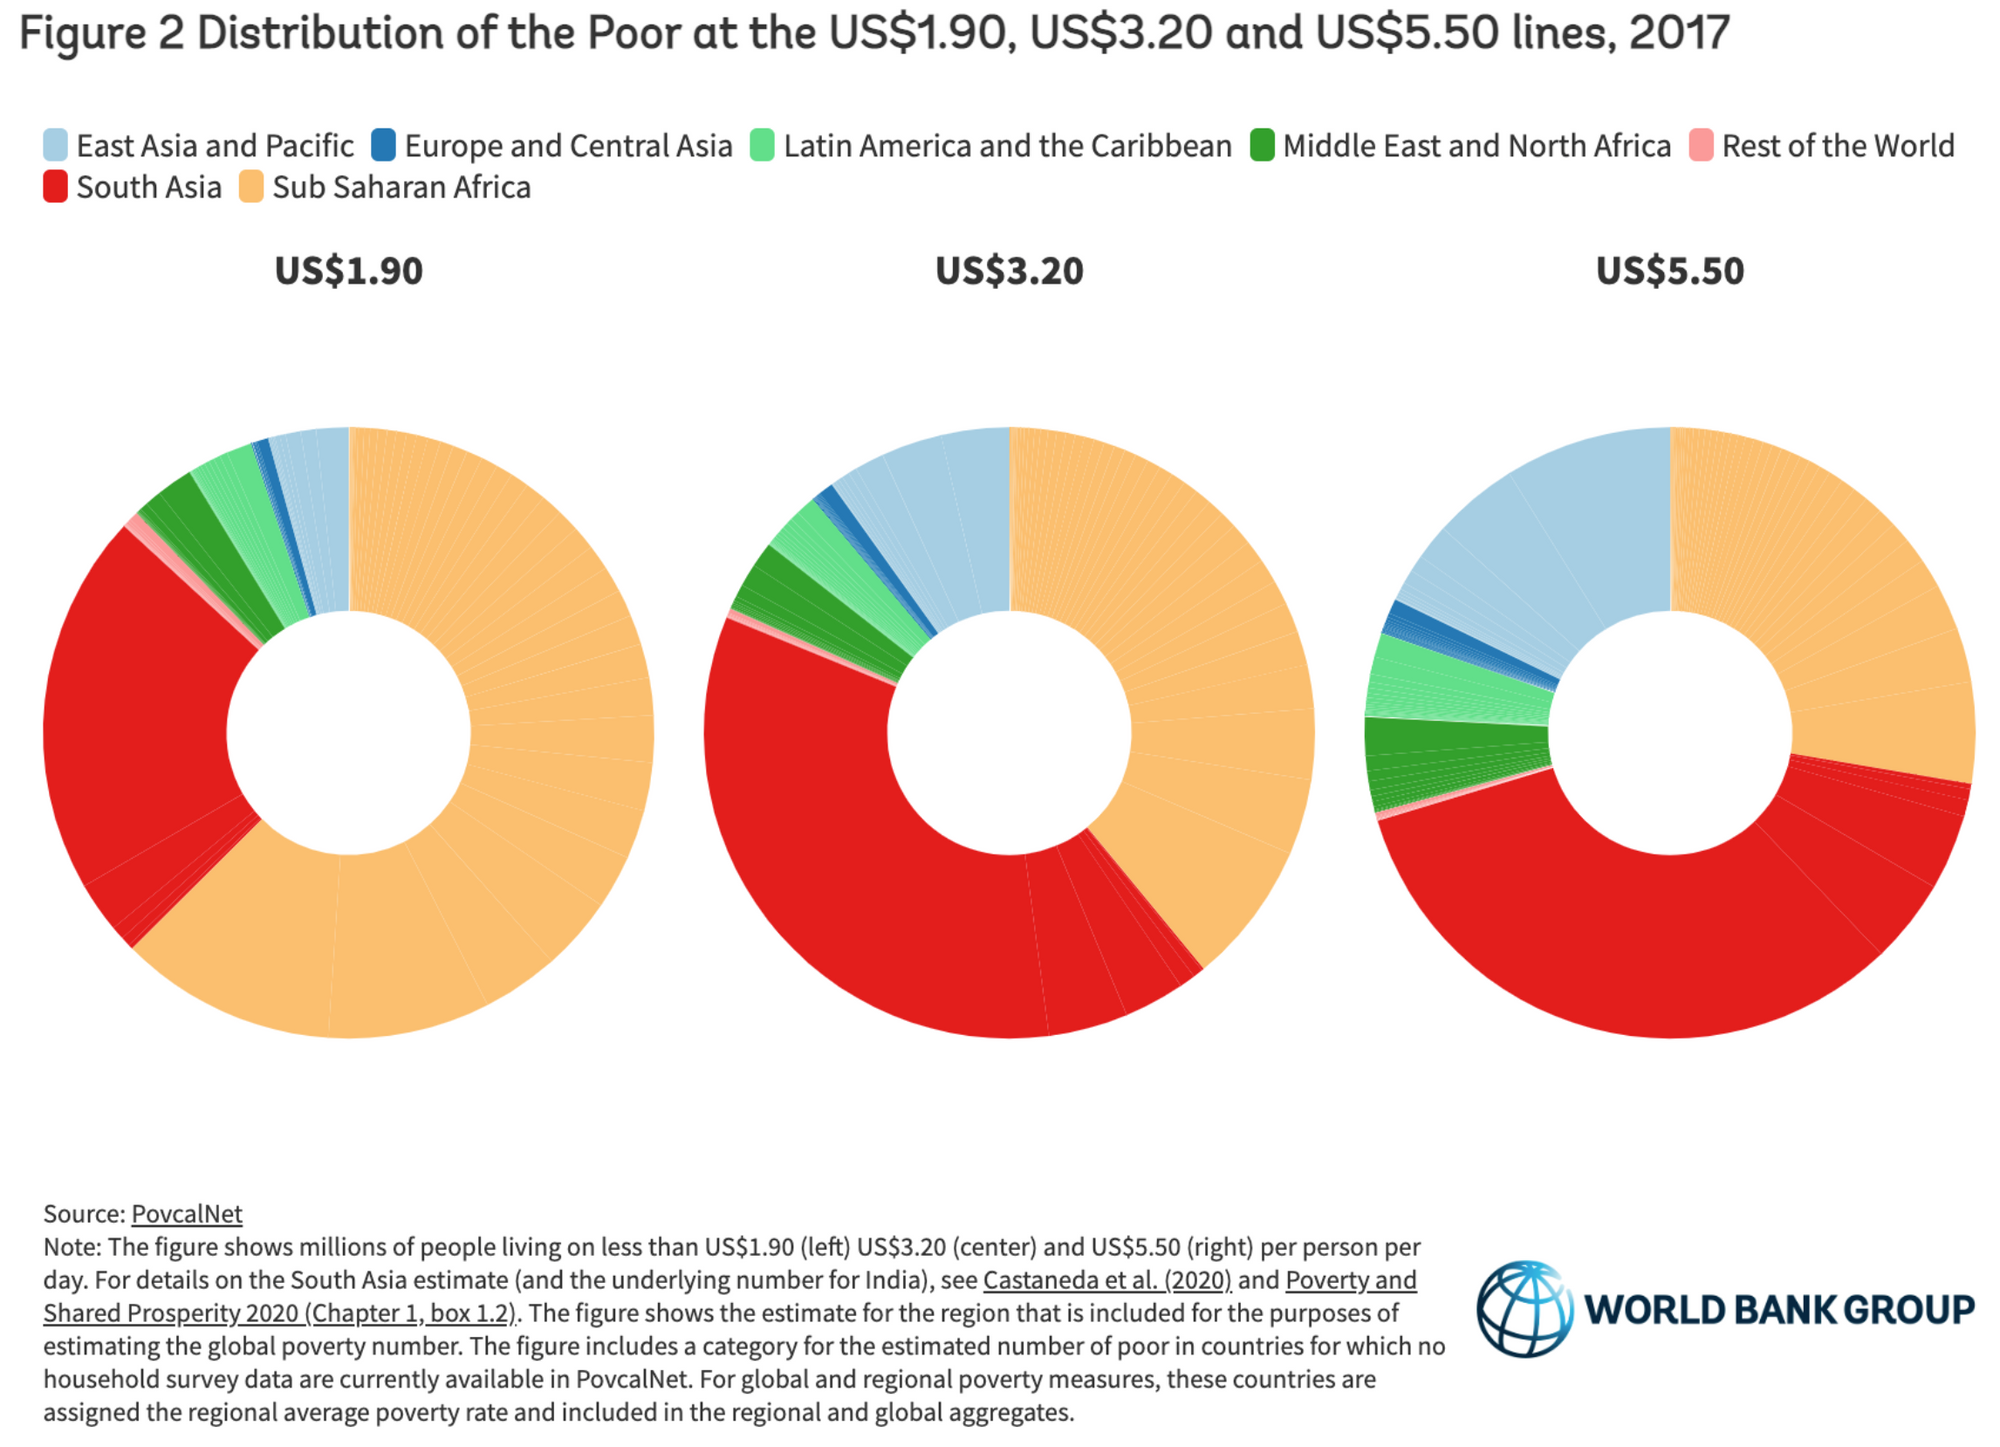 World Bank poverty lines as of 2017